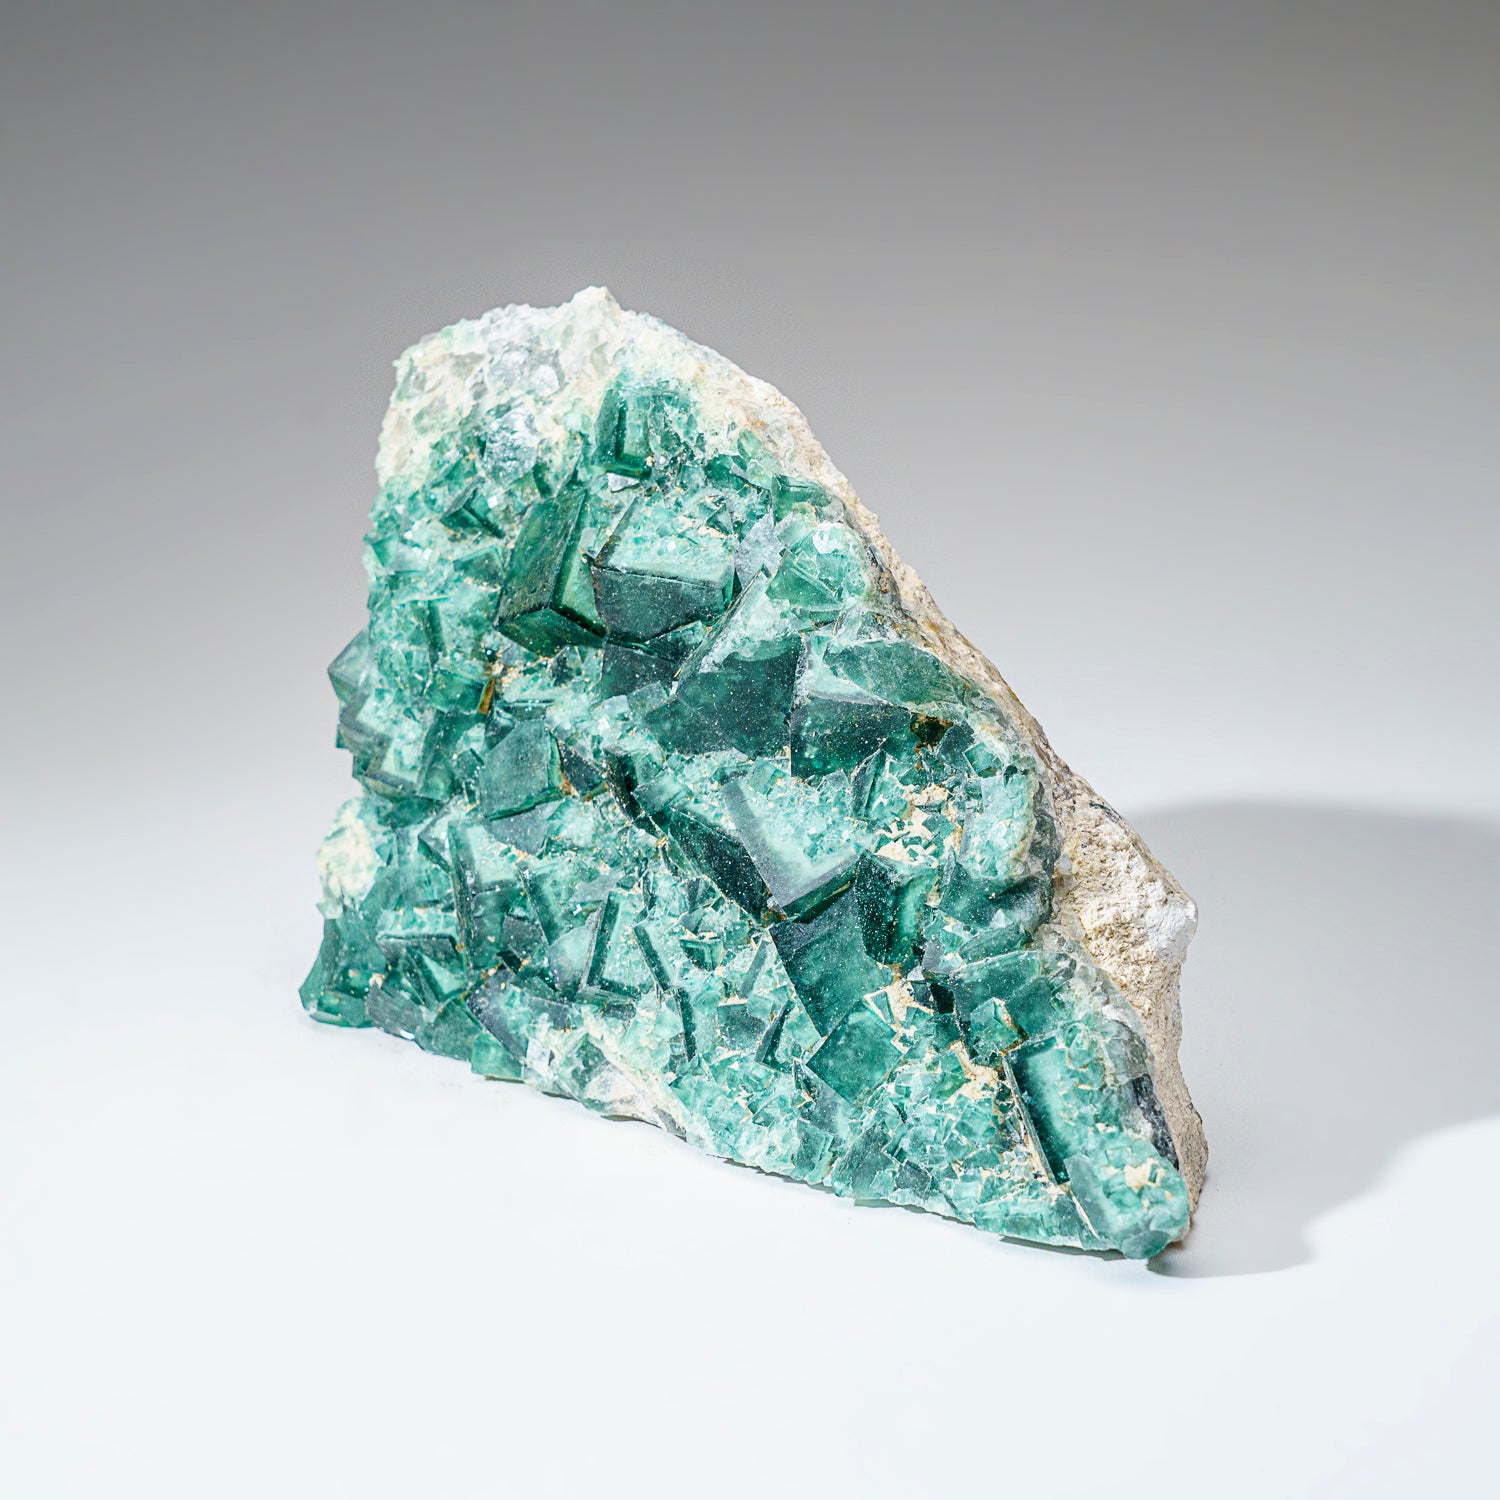 Genuine Green Fluorite from Namibia (3.5 lbs)